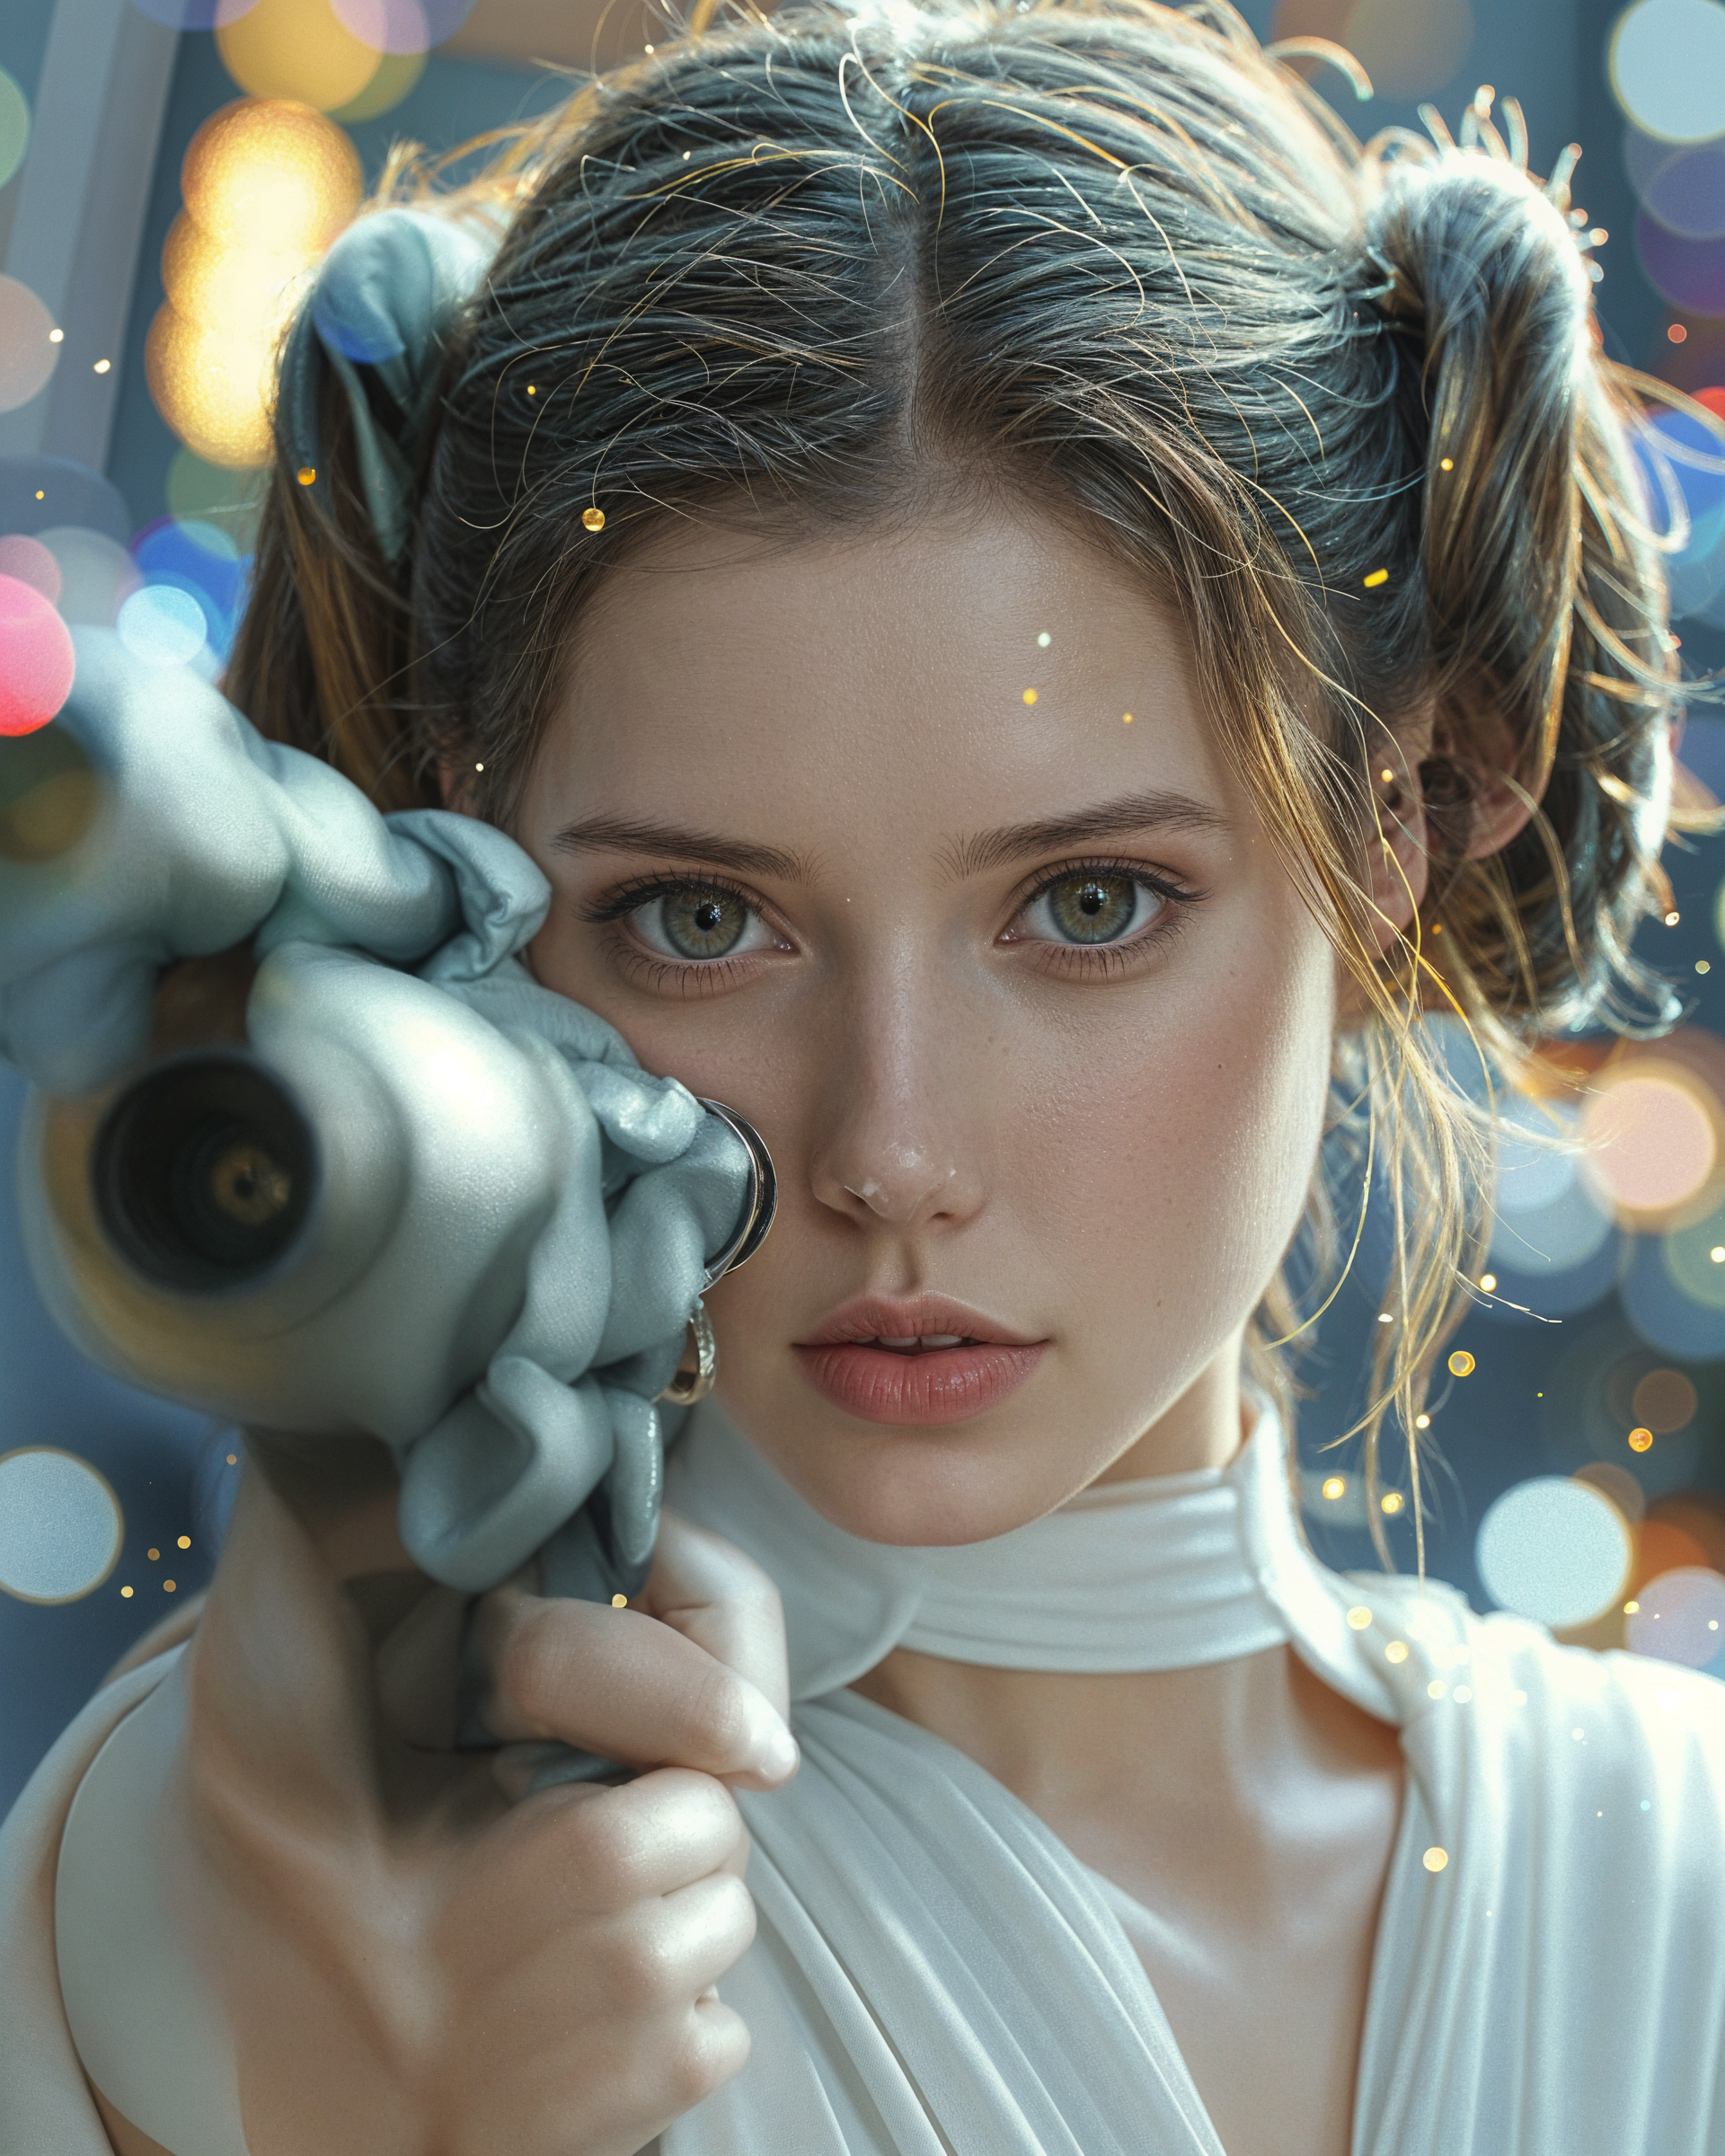 Digital painting of a woman styled like Princess Leia in white, holding a blaster, against a colorful bokeh background.